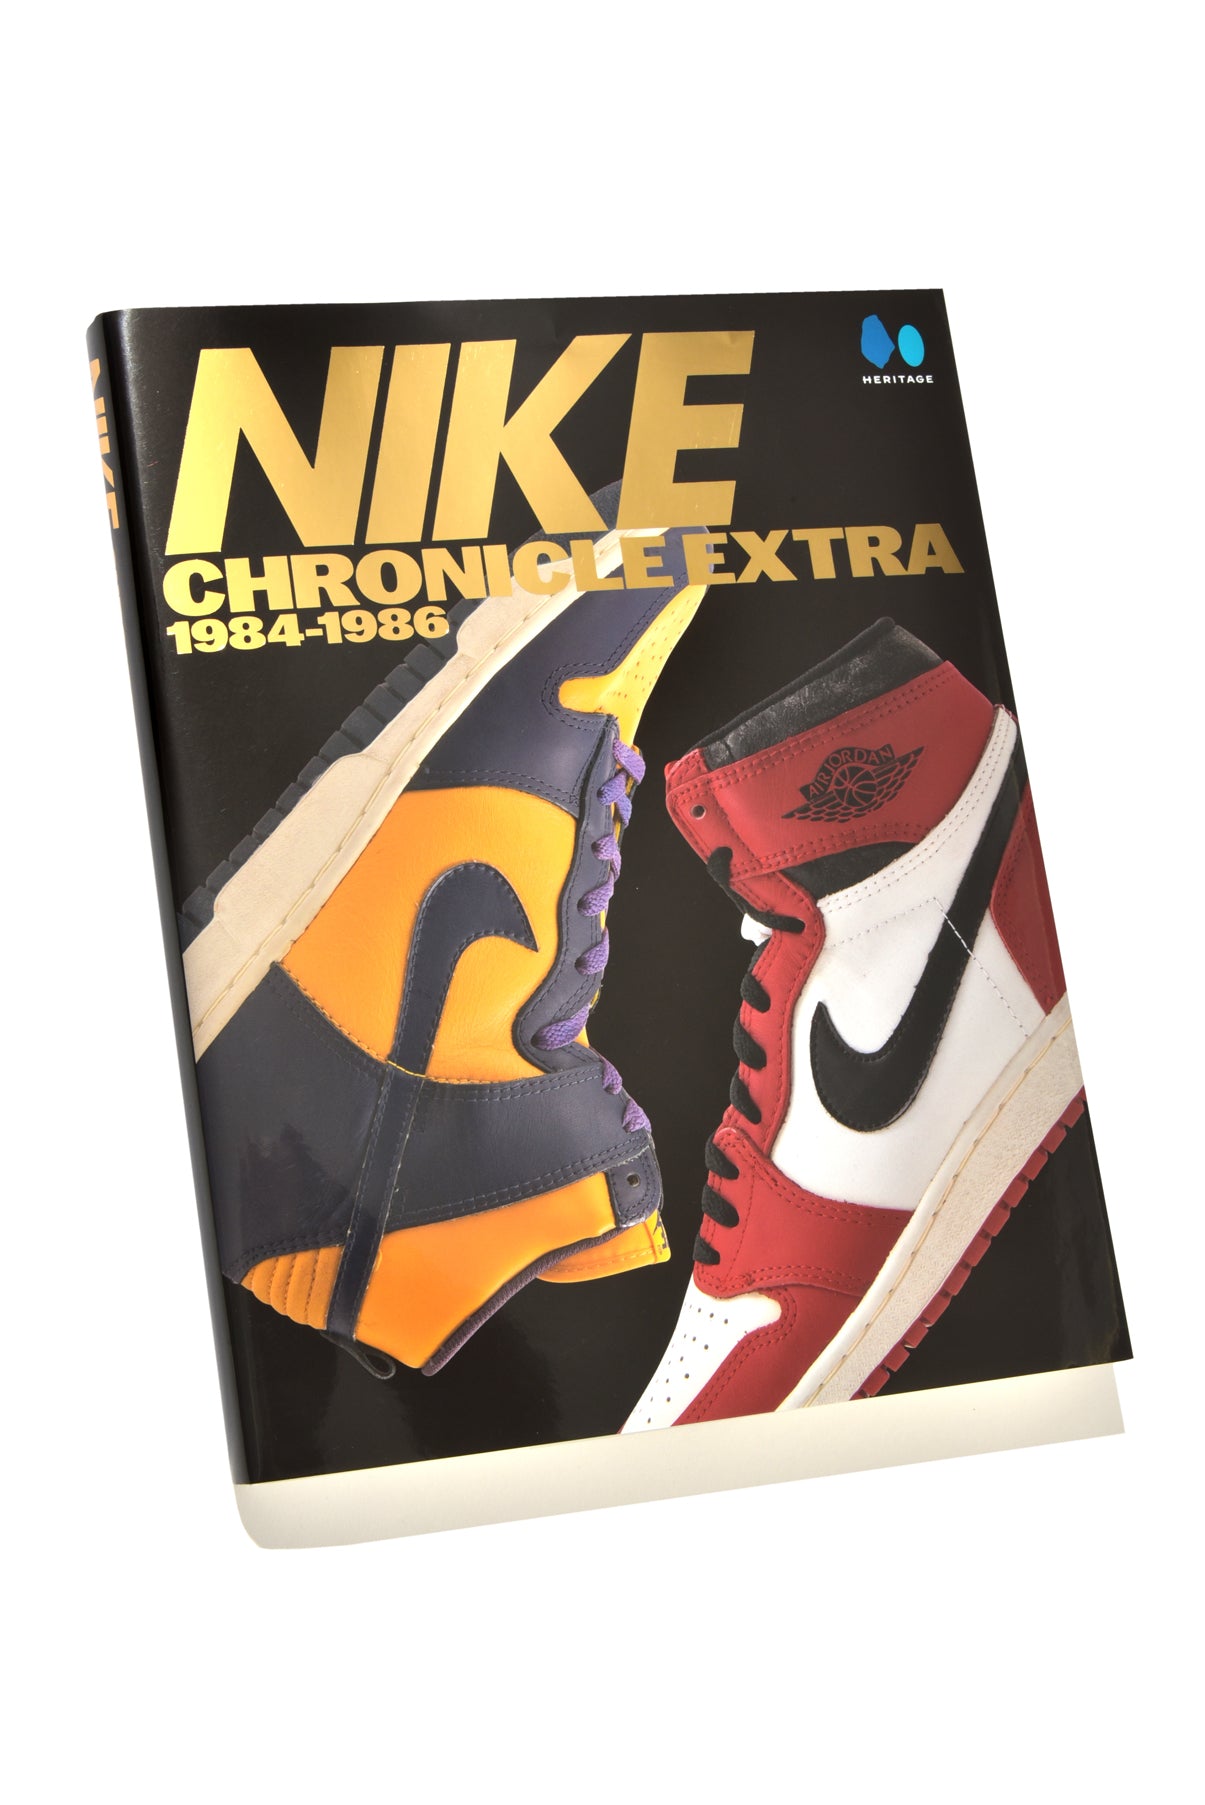 NIKE CHRONICLE 2冊セット【ポスター付き】